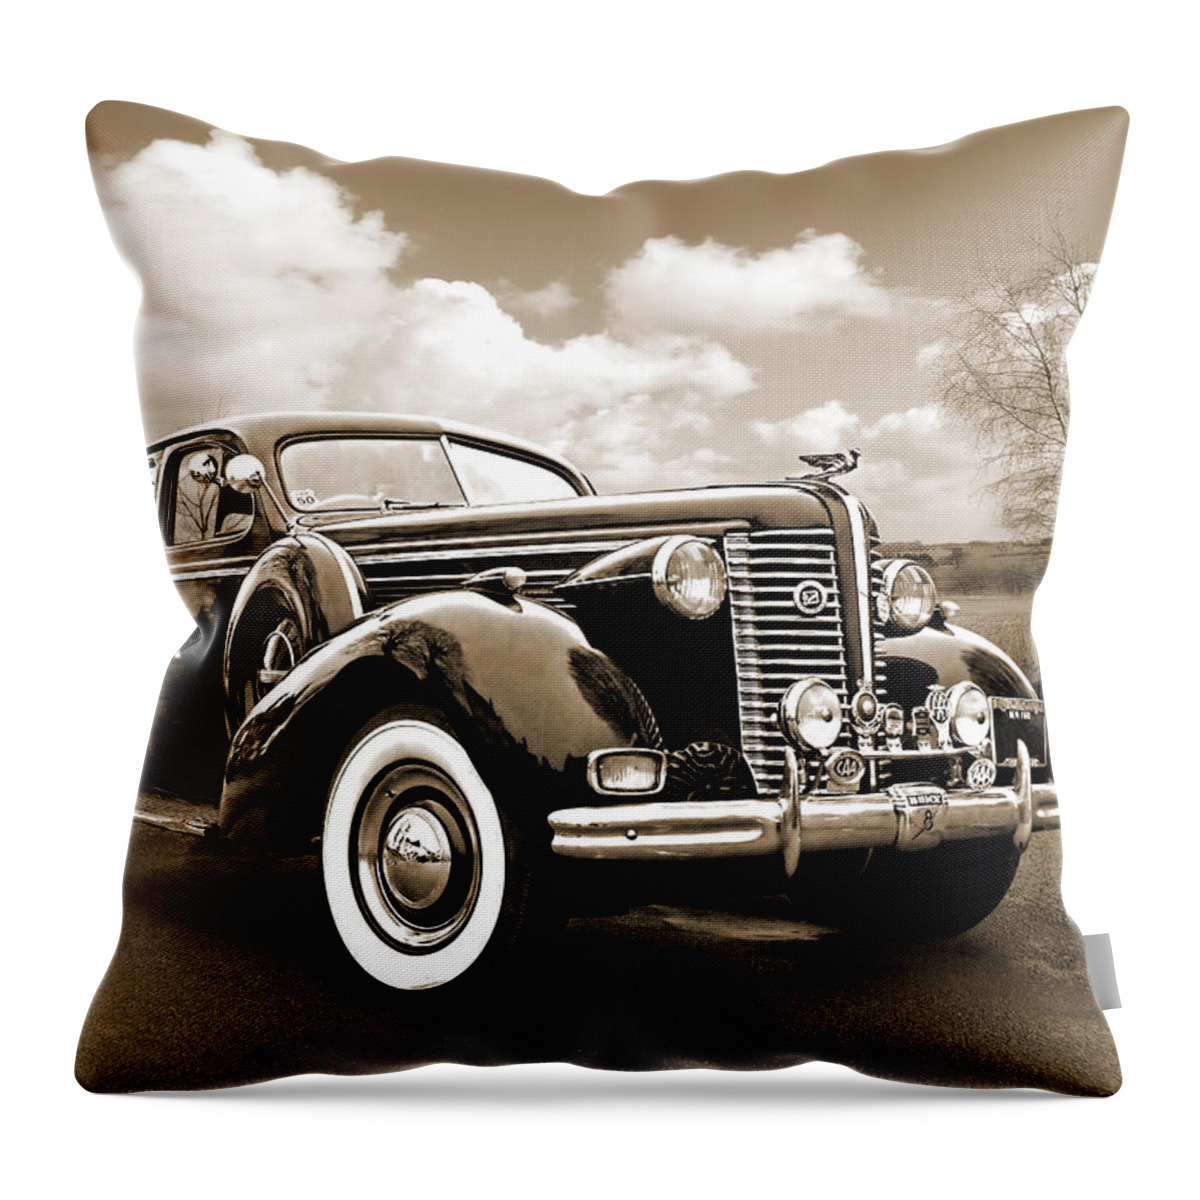 Buick Throw Pillow featuring the photograph Buick 8 1938 Sedan in Sepia by Gill Billington